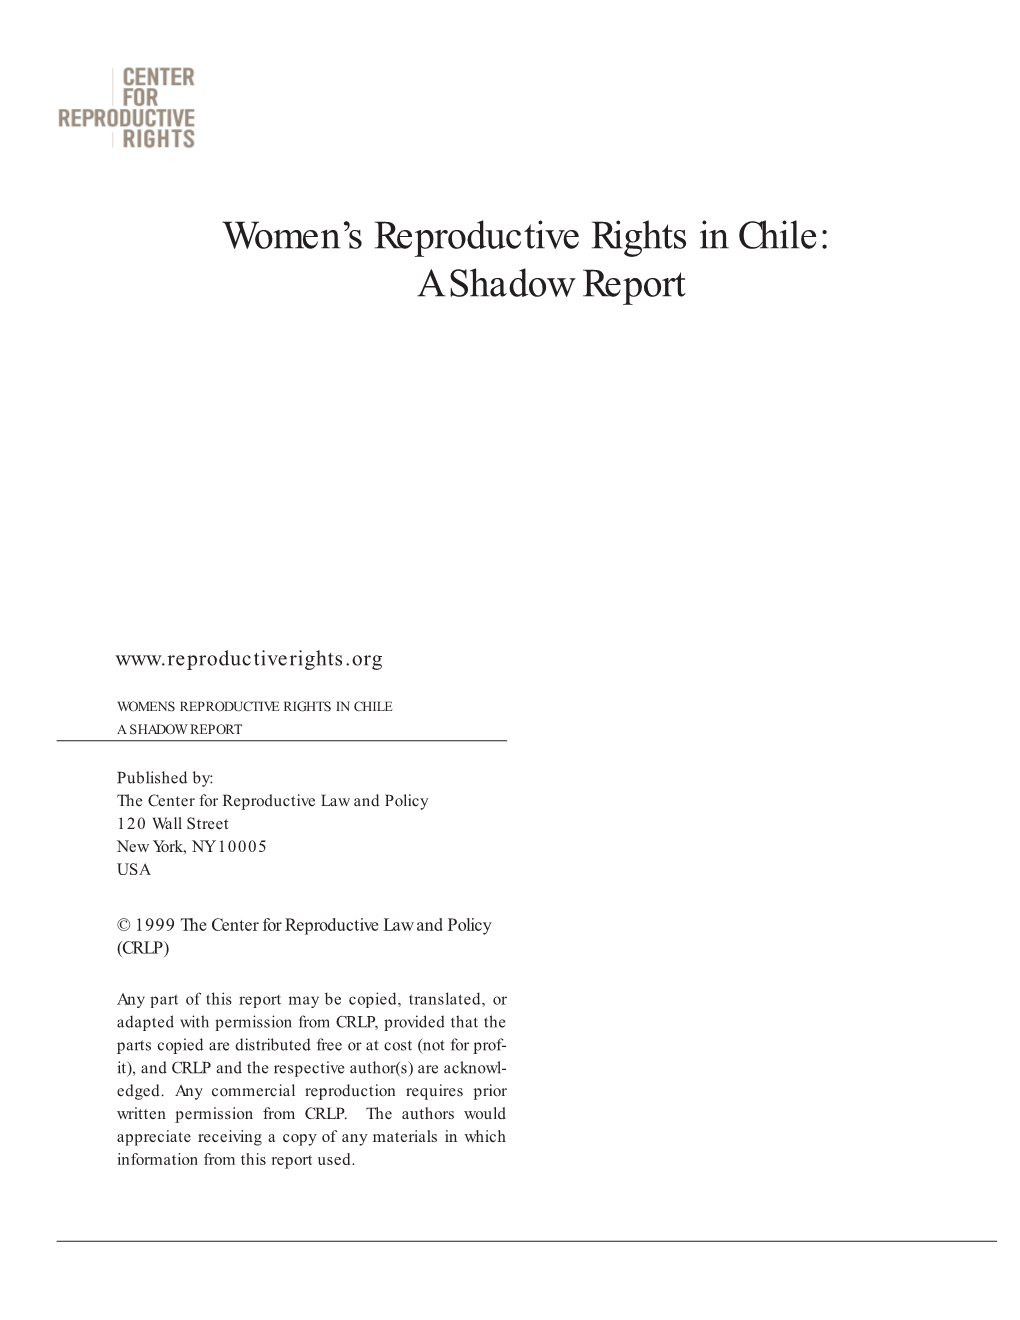 Women's Reproductive Rights in Chile